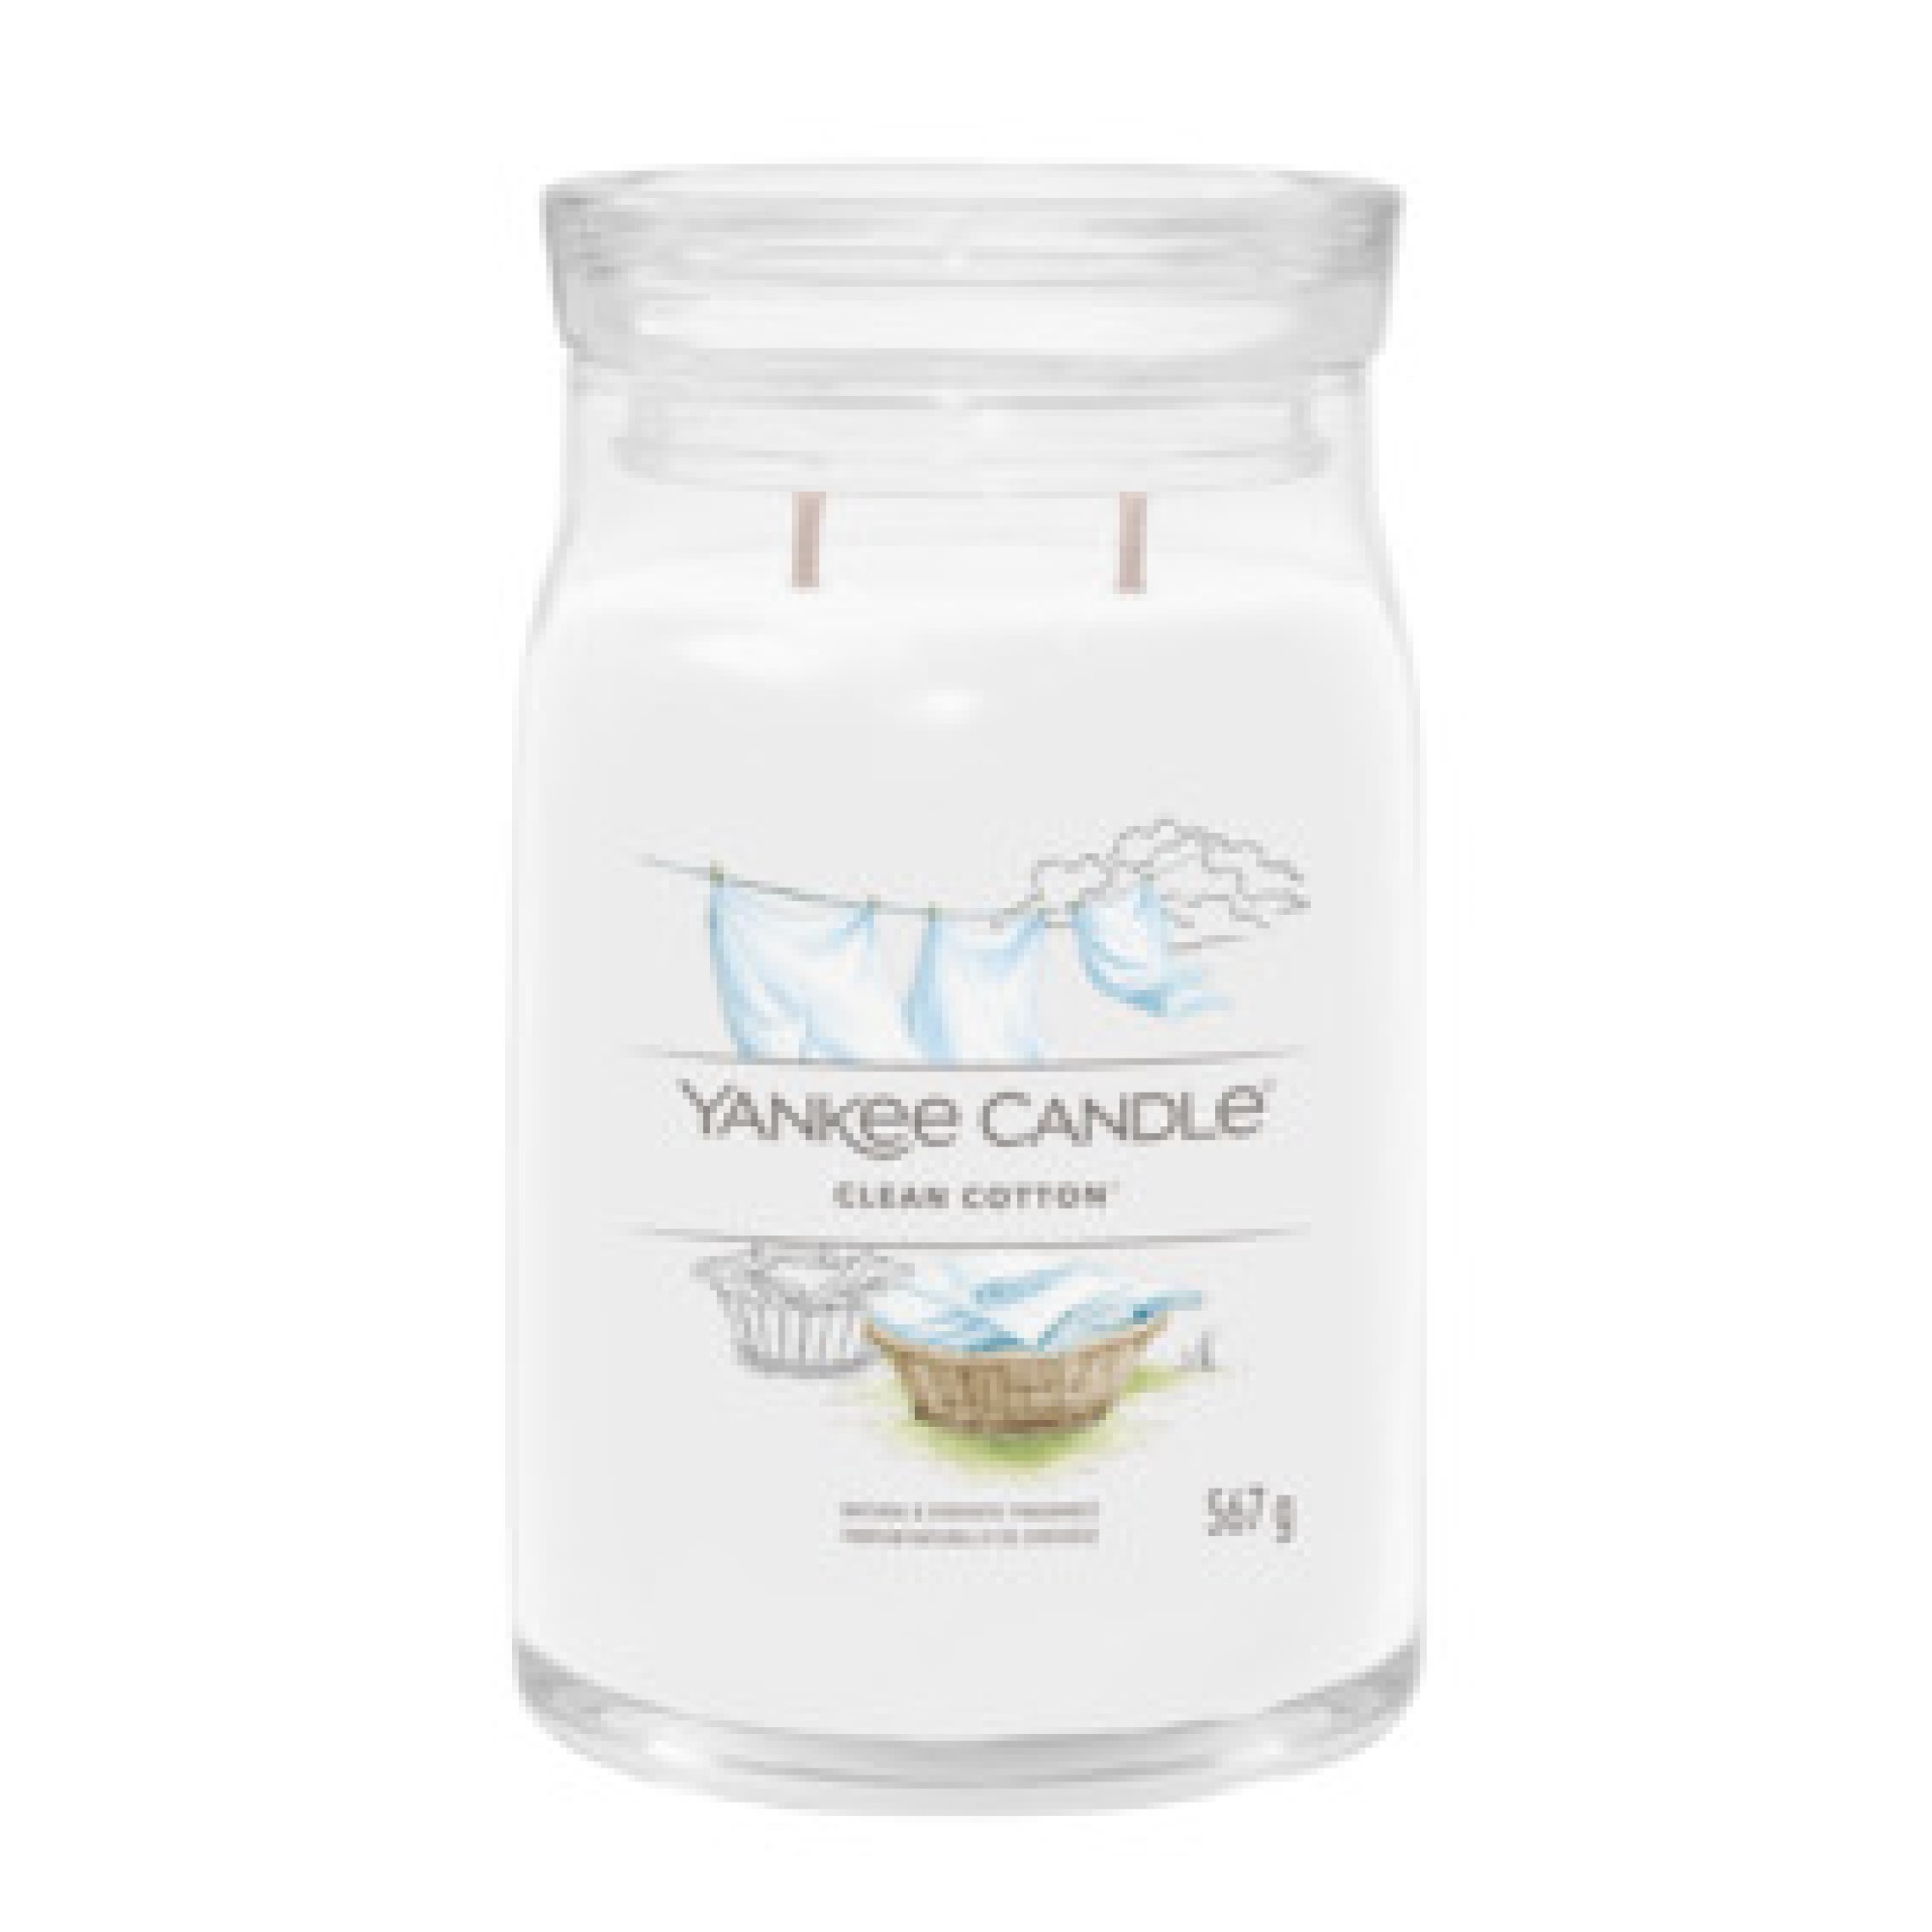 Clean cotton- Signature Large Jar Candle - The Candle Scentre